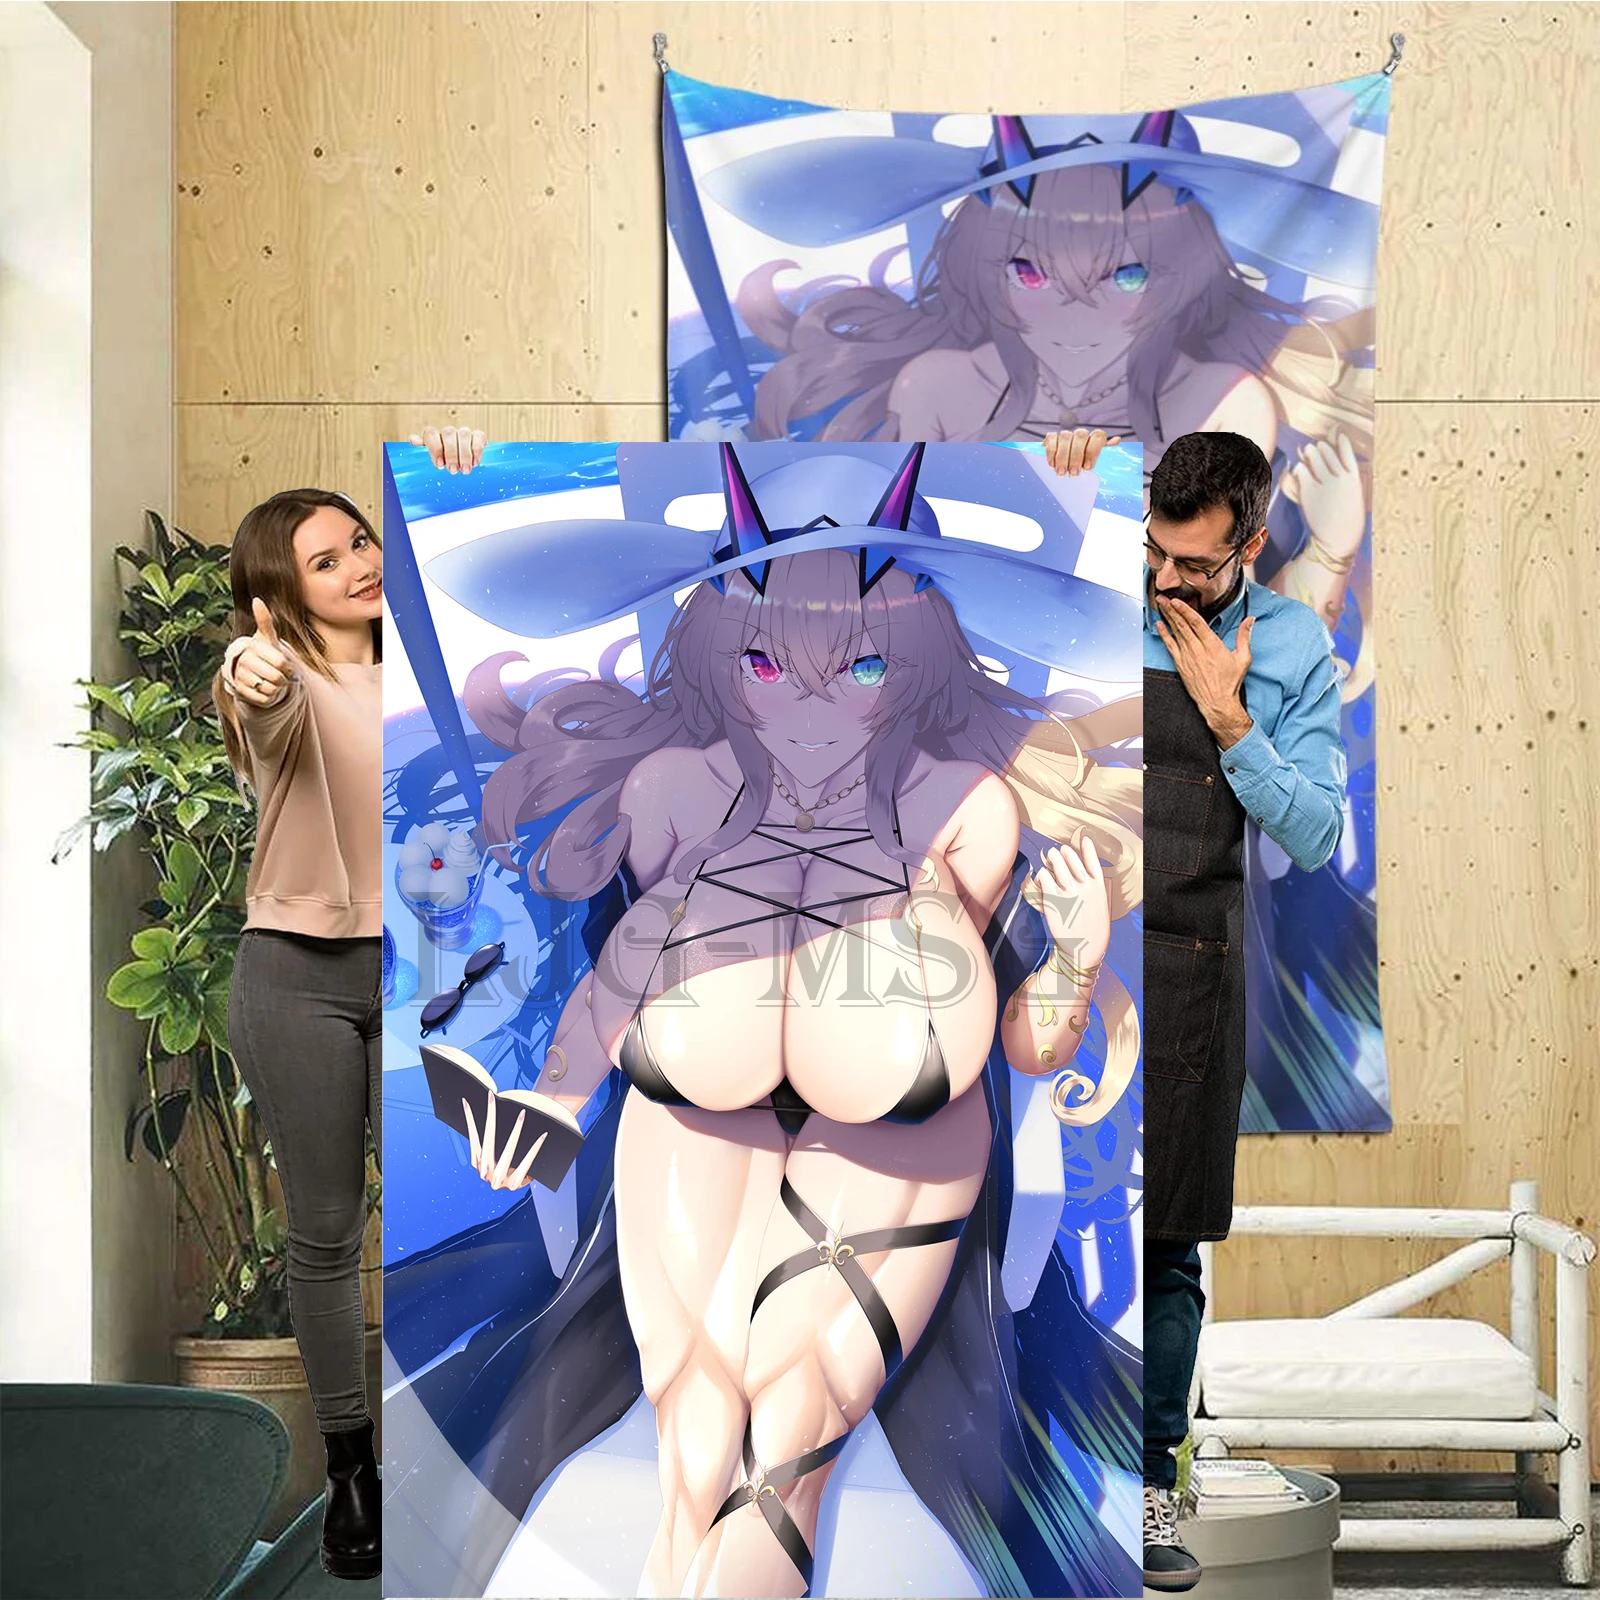 

Fate Grand Order Tapestry Hentai Anime Poster Room Decor Animation Wall Decor Fairy Knight Gawain Sexy Adult Doujin Illustrate H